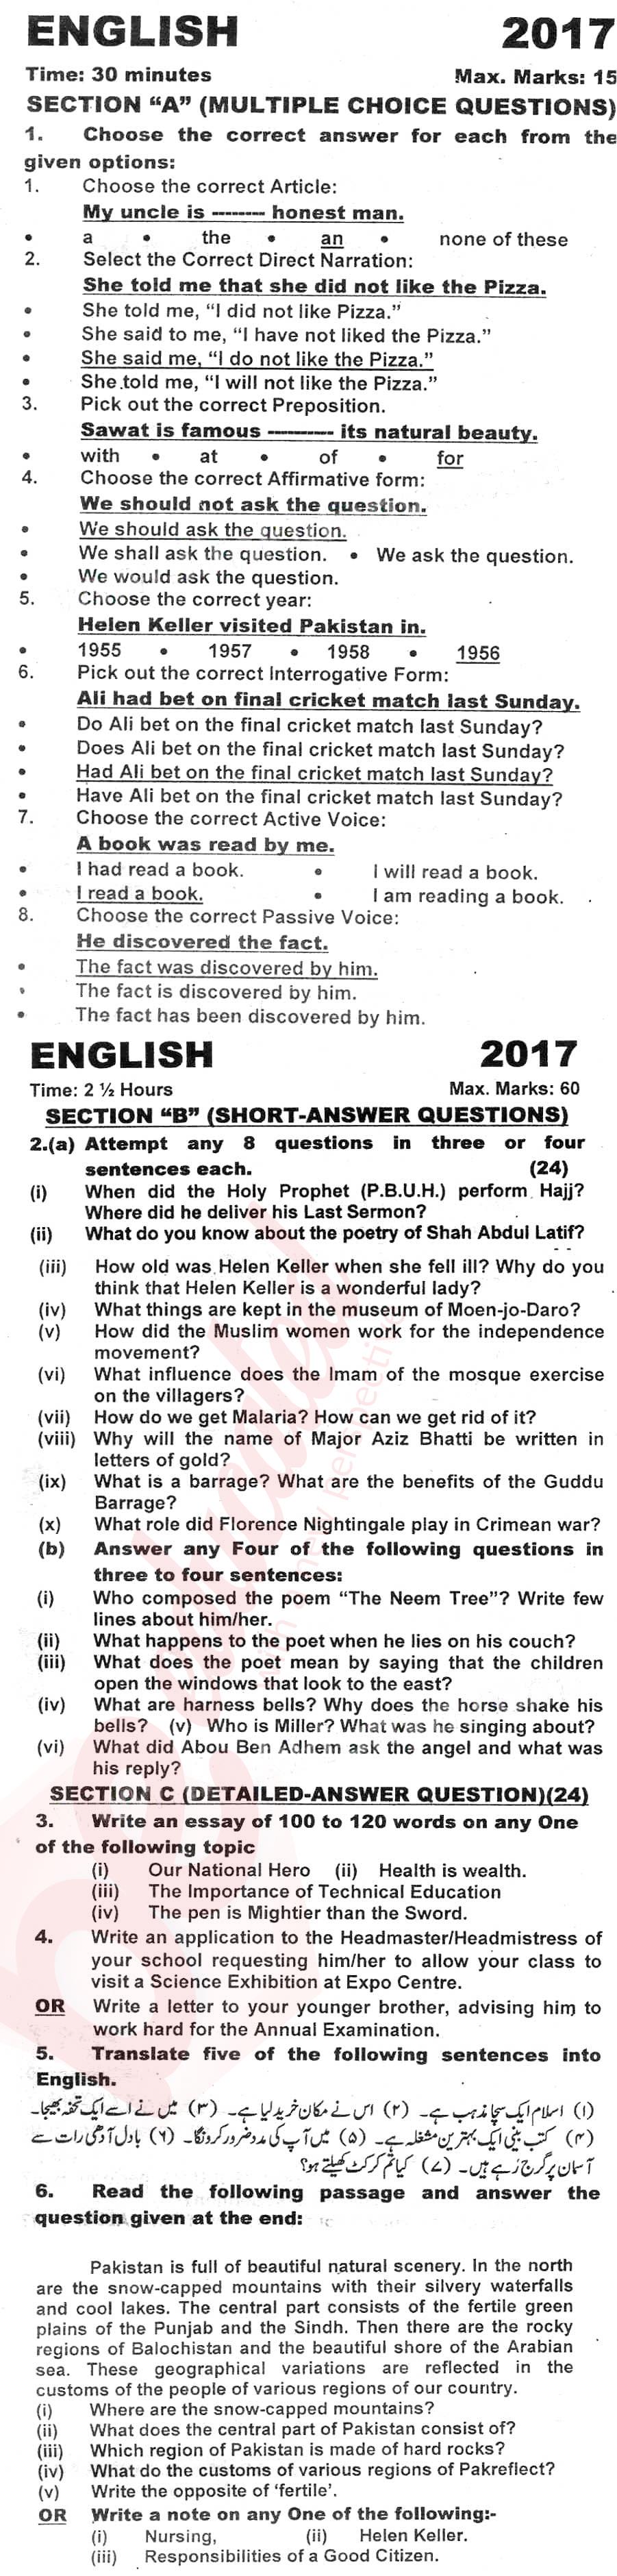 English 9th class Past Paper Group 1 KPBTE 2017